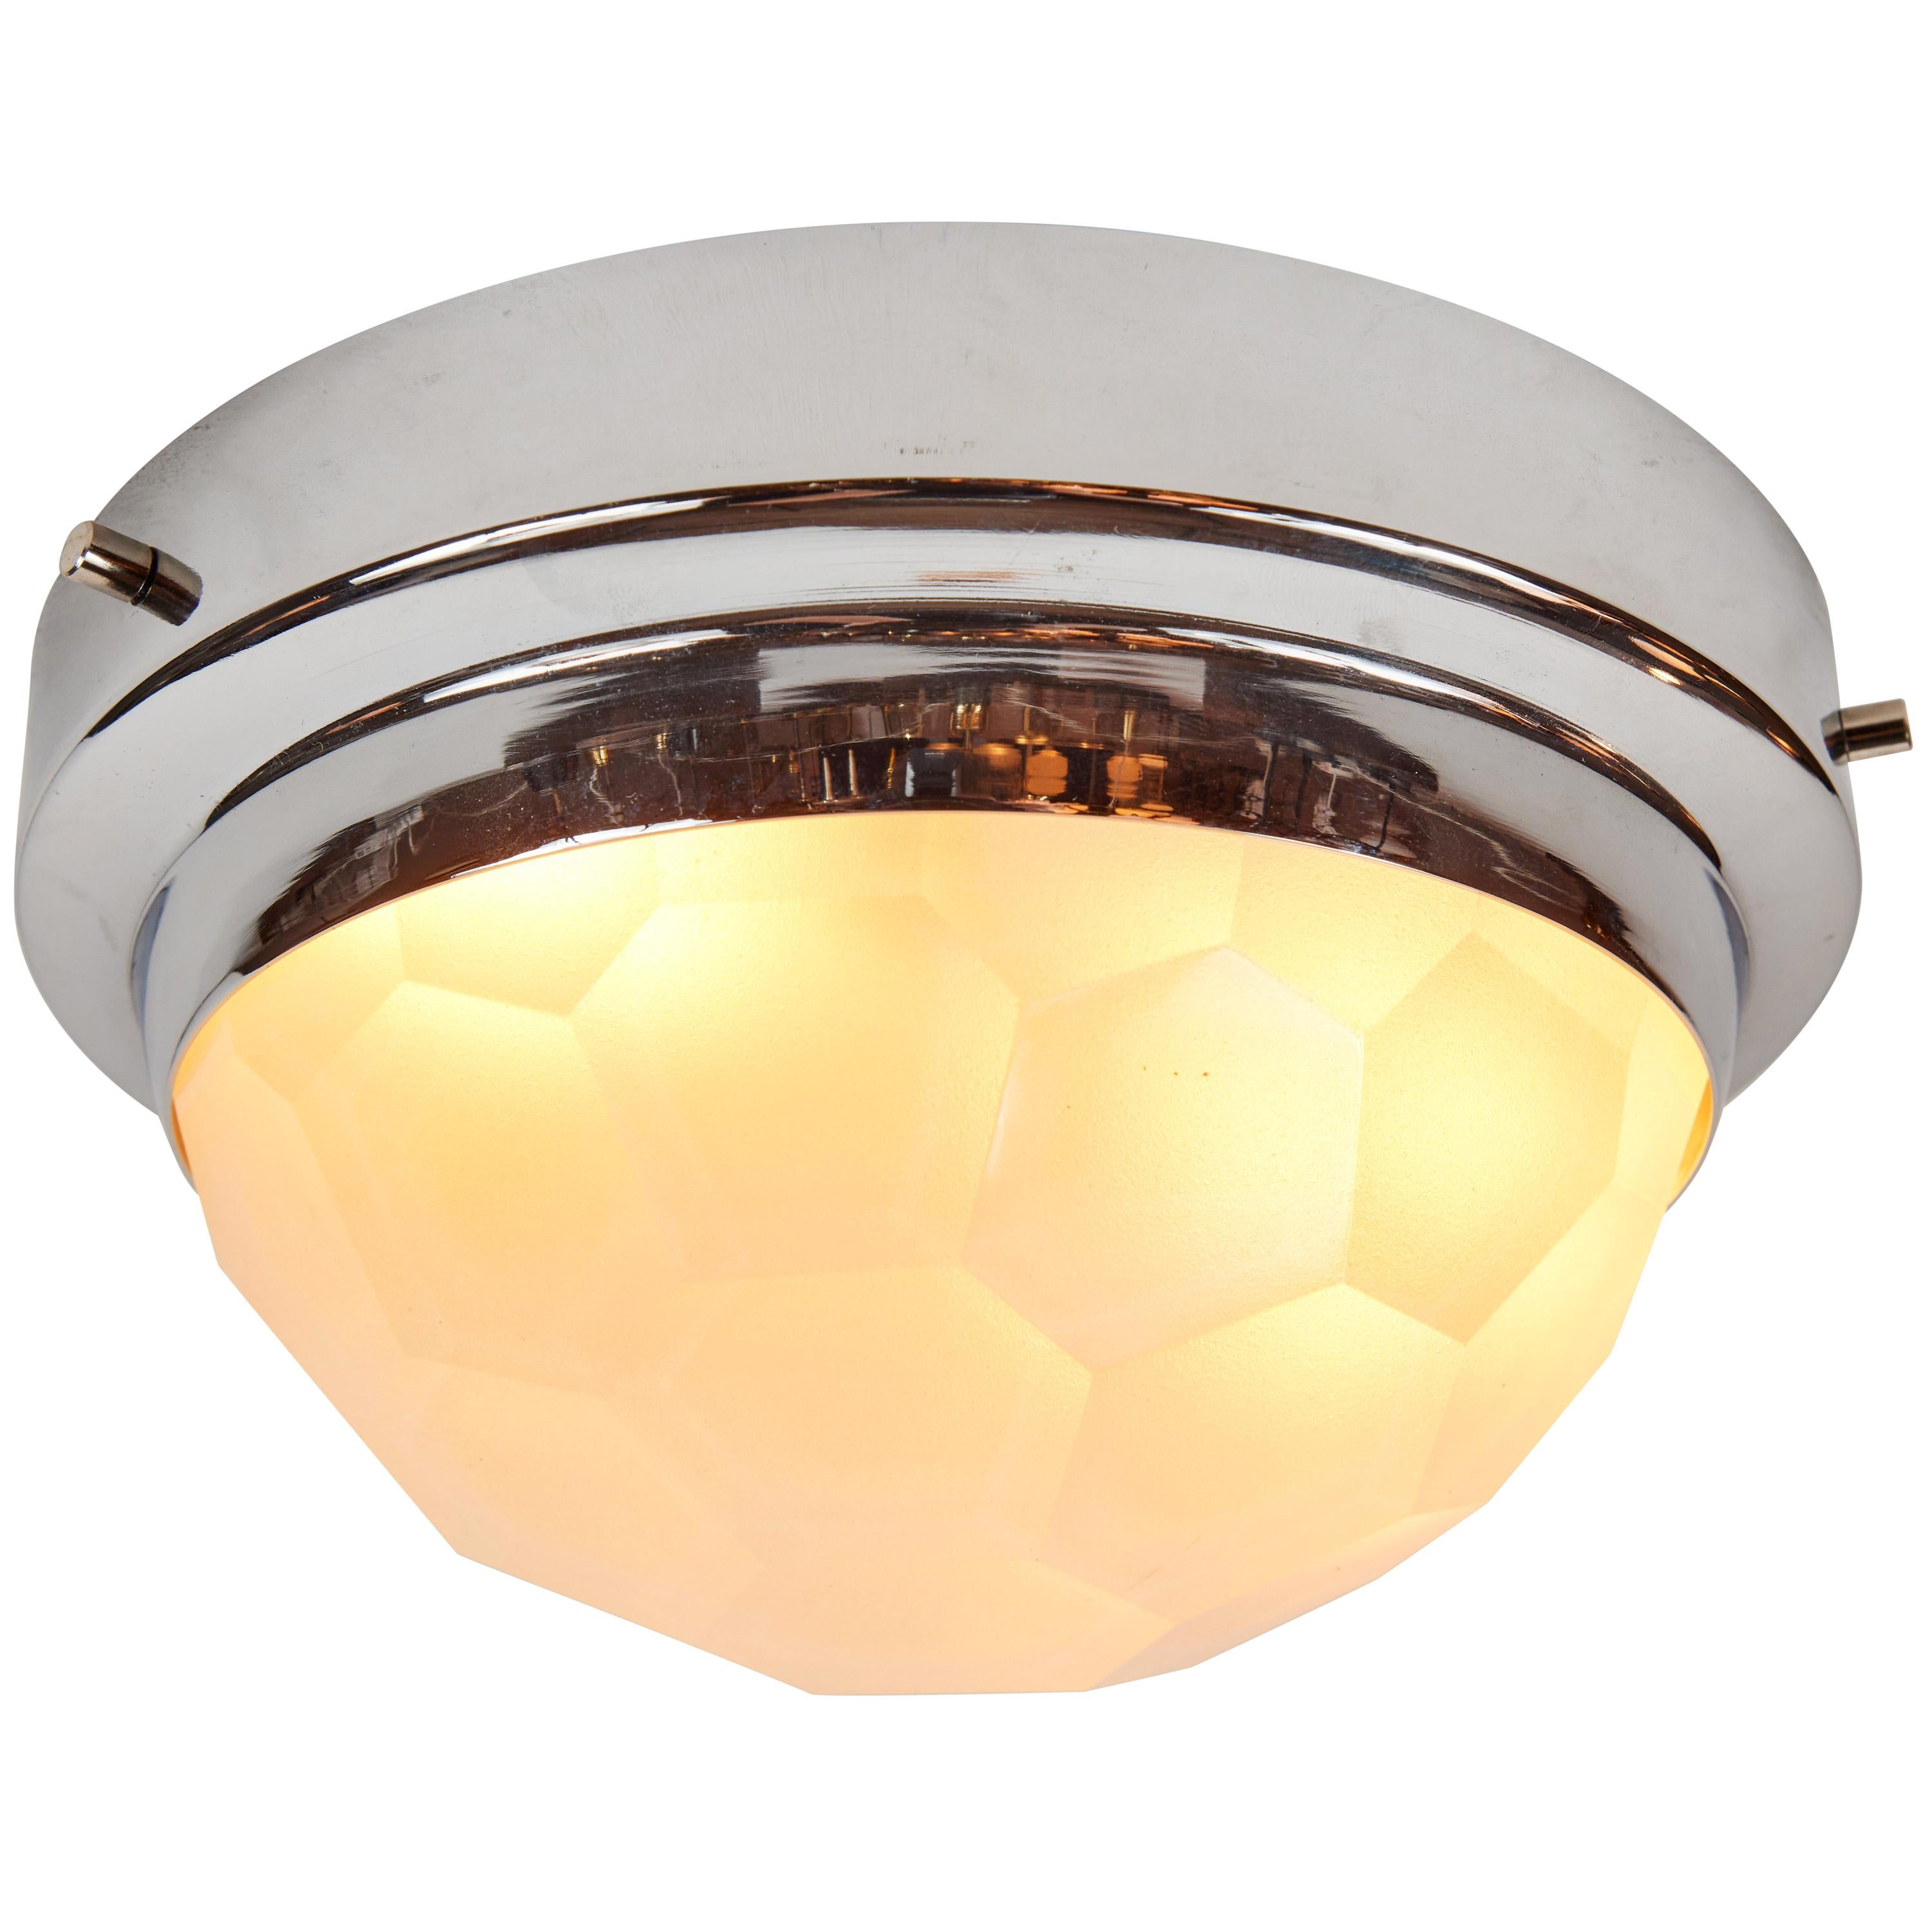 1960s Pia Guidetti Crippa Multifaceted Wall or Ceiling Light for Lumi